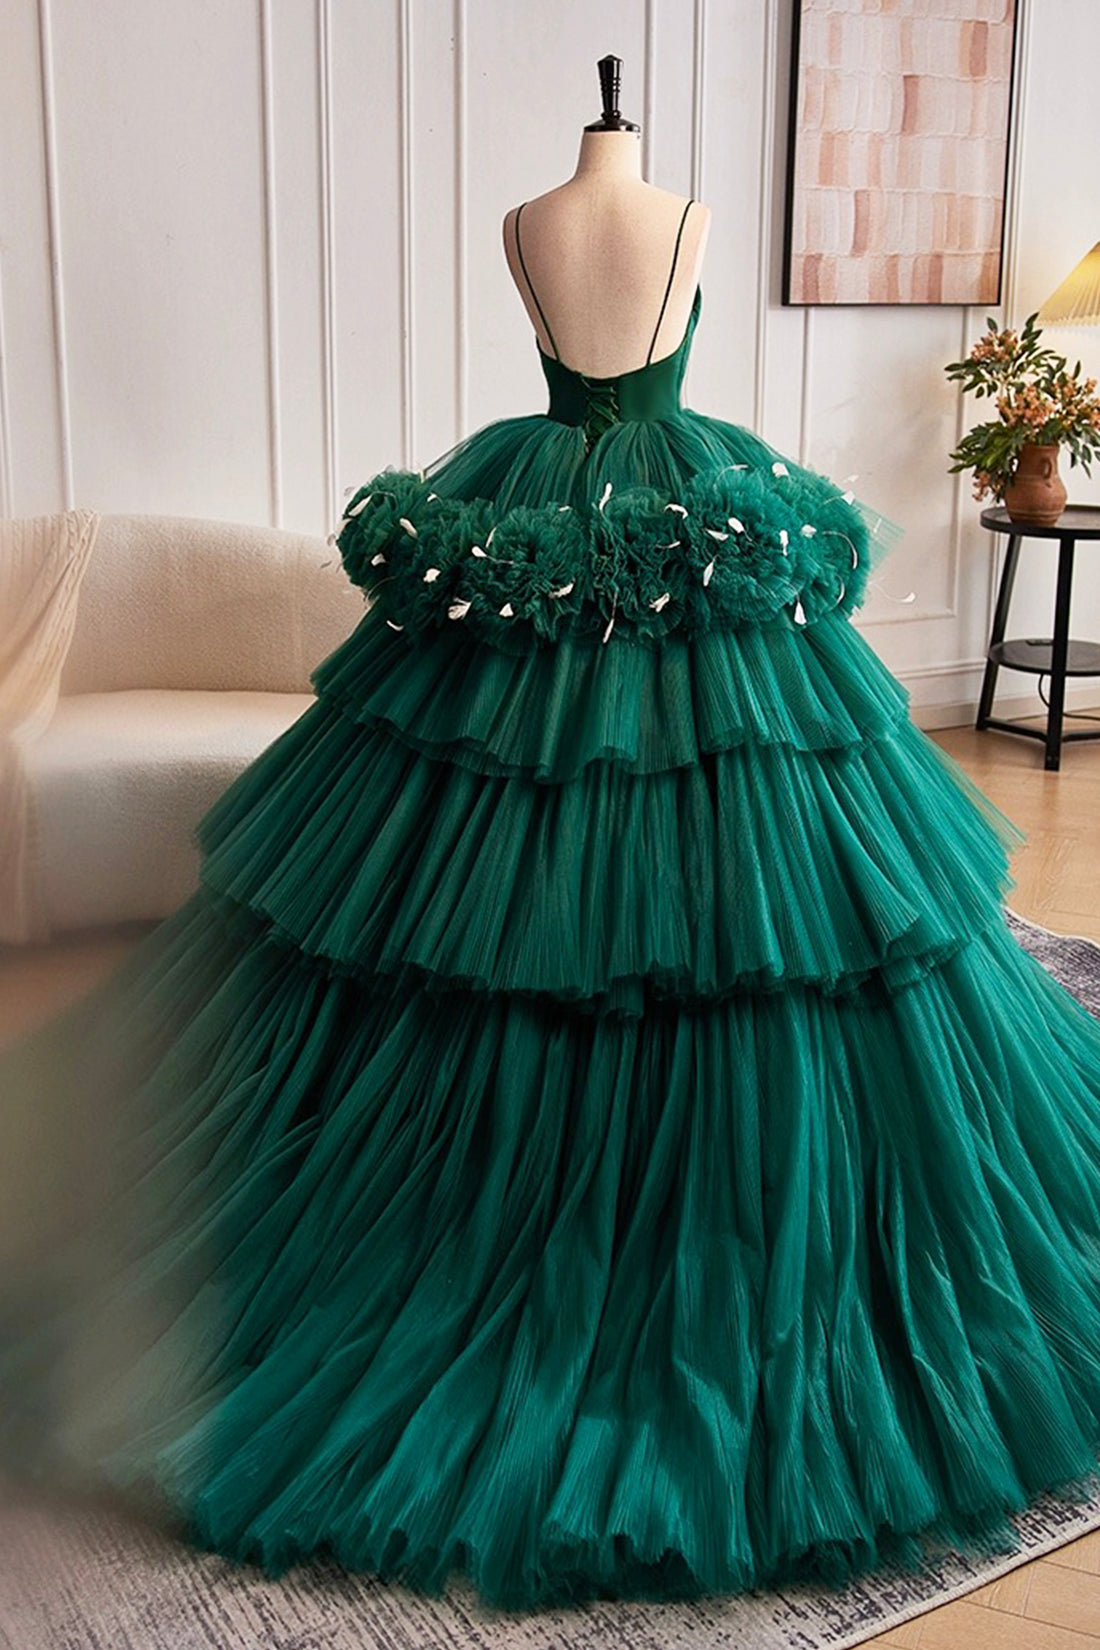 Green Spaghetti Strap V-Neck Ball Gown Dress, A-Line Backless Evening Formal Dress